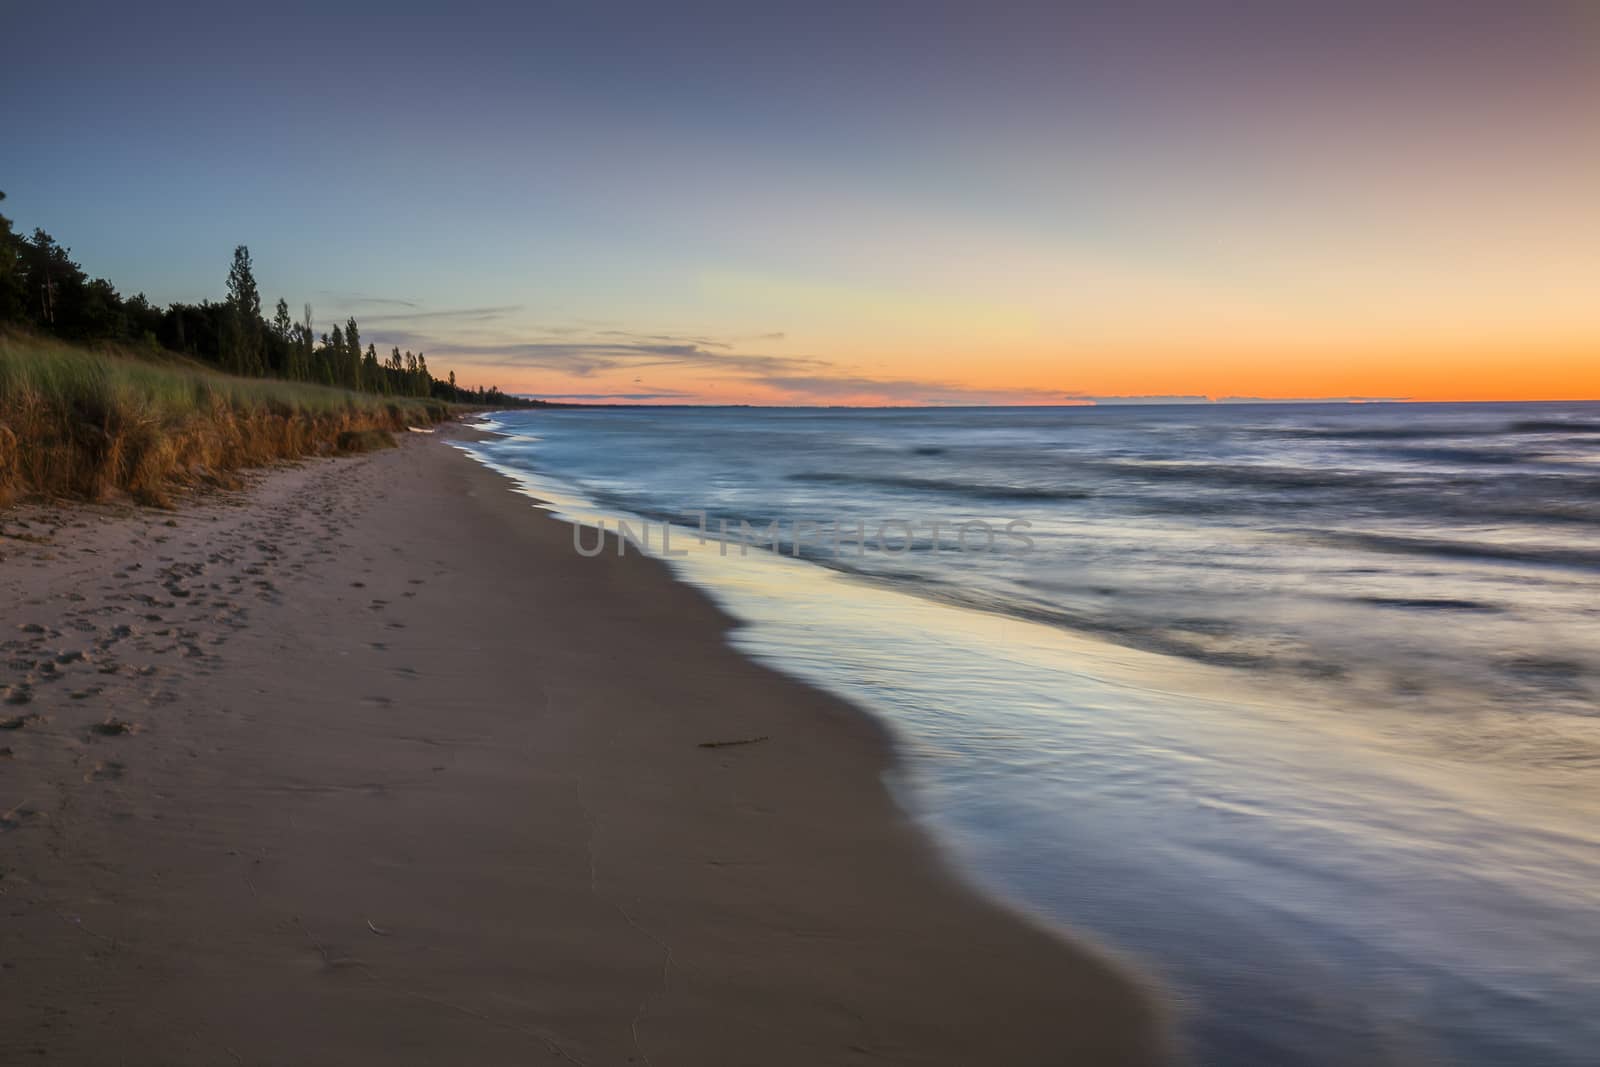 A Lake Huron beach after sunset - Pinery Provincial Park, Ontario, Canada